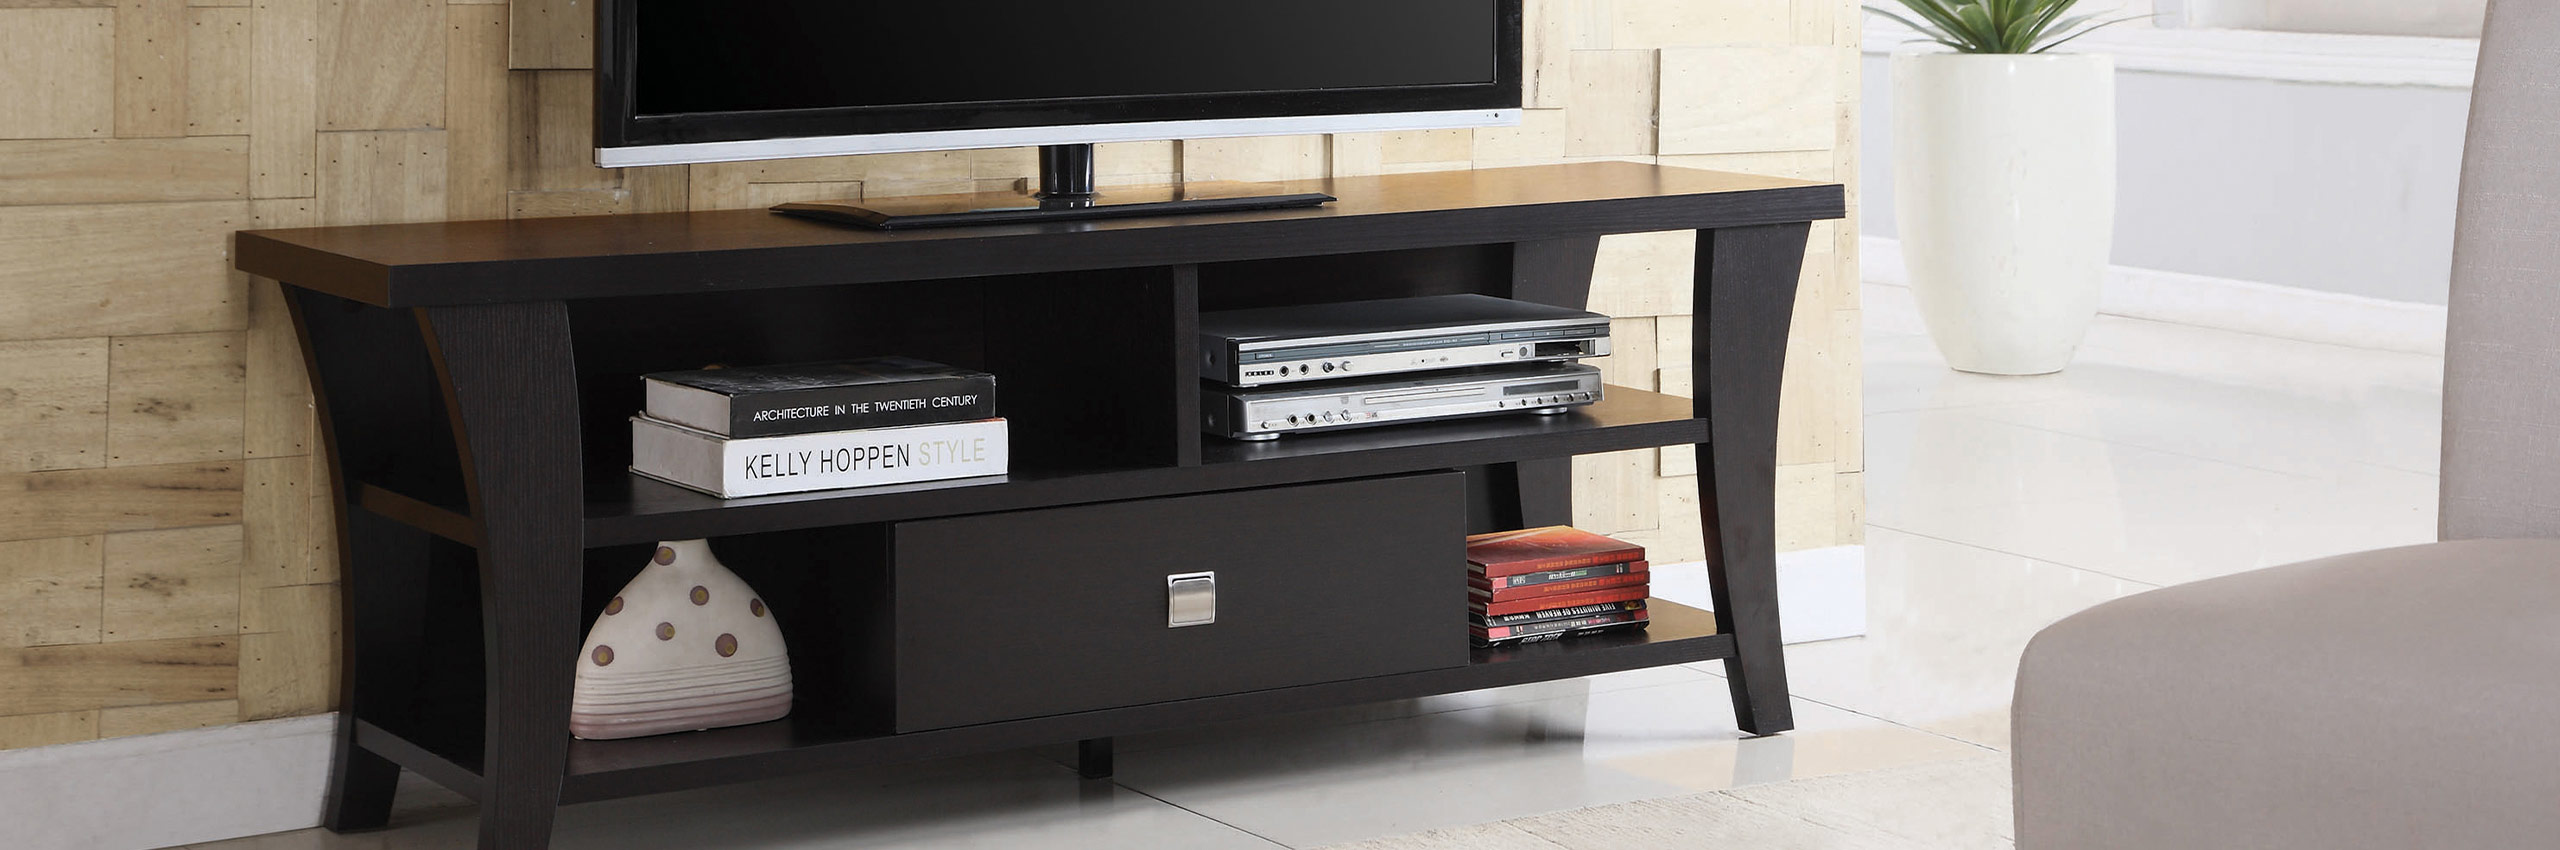 TV Stands for Your Home Entertainment in the UP